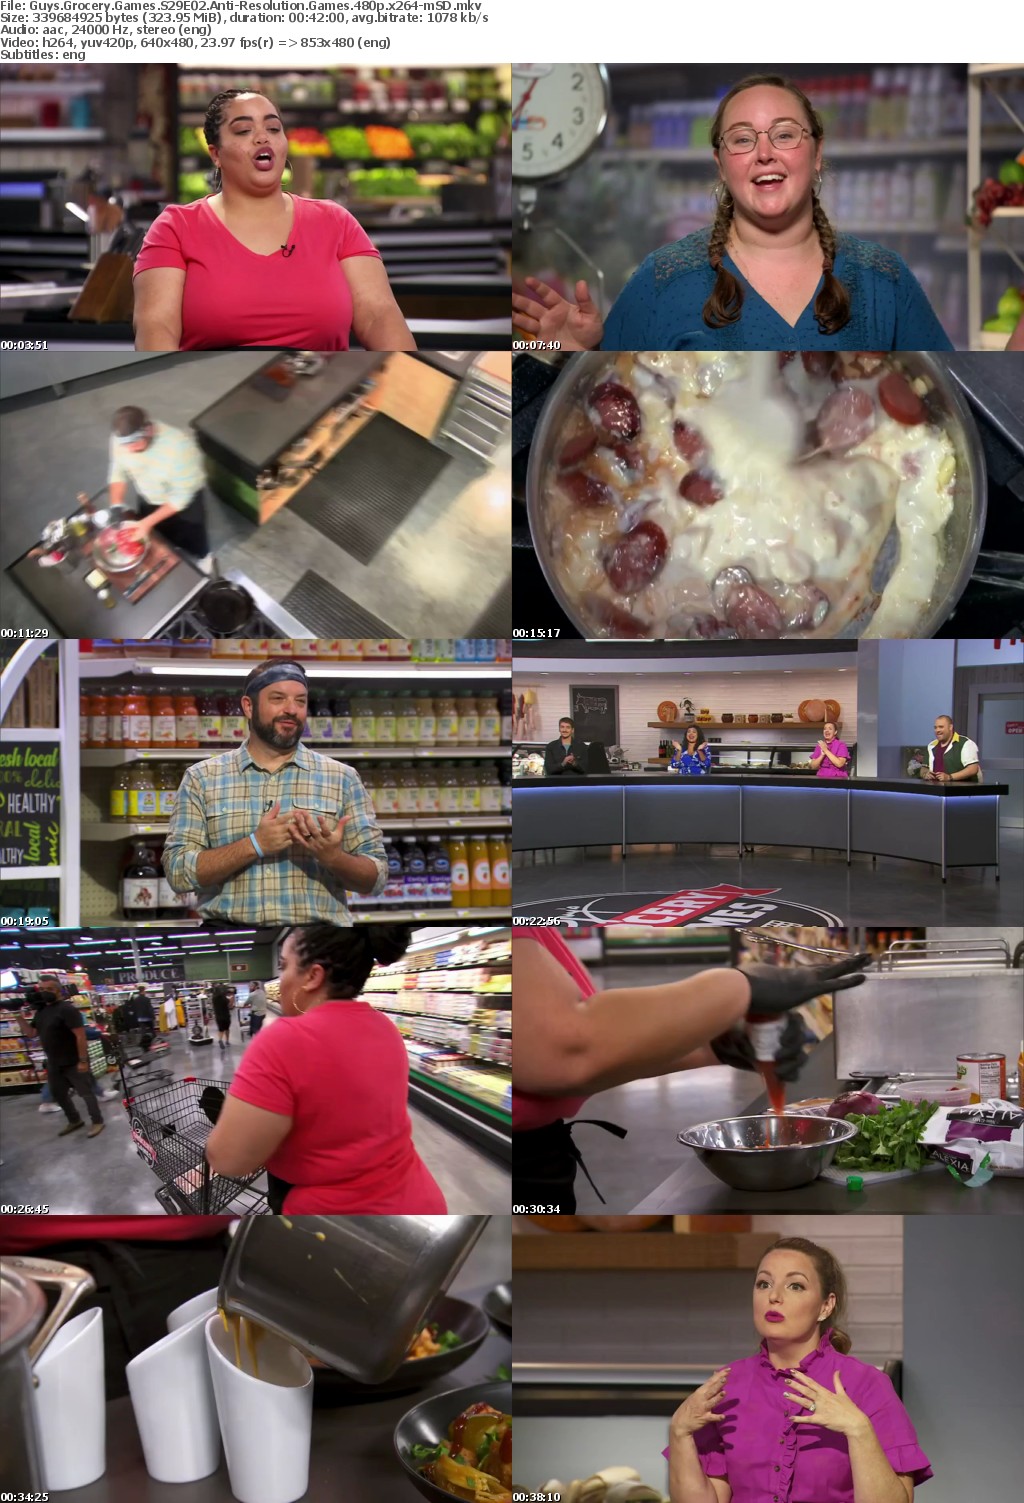 Guys Grocery Games S29E02 Anti-Resolution Games 480p x264-mSD